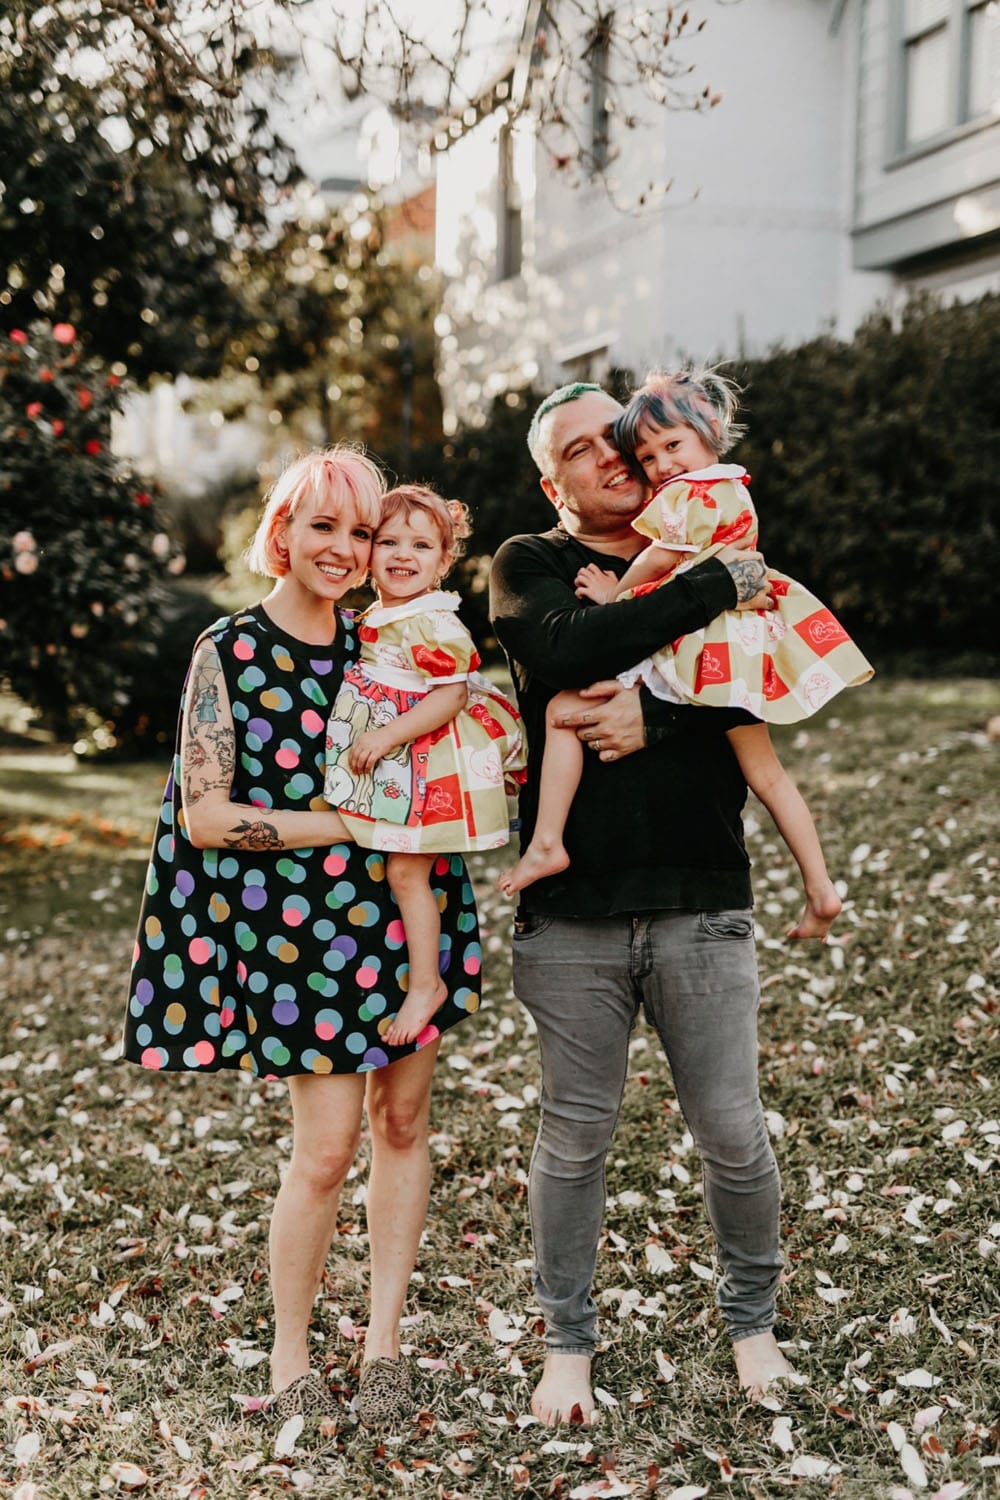 Sherri with her husband, Max Bemis, and their daughters Lucy and Coraline. Photo: Alex Modisette